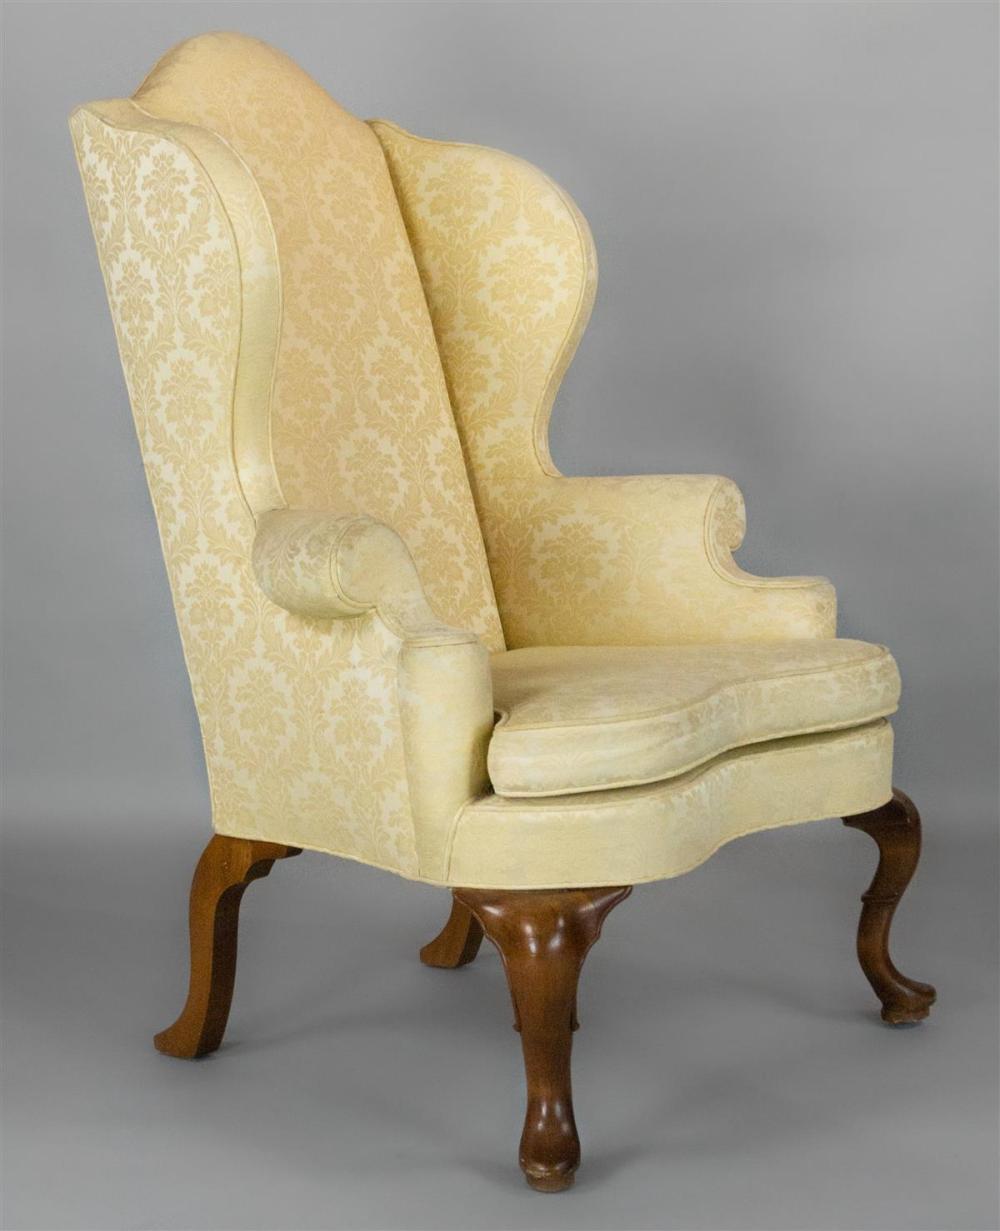 QUEEN ANNE STYLE DAMASK UPHOLSTERED